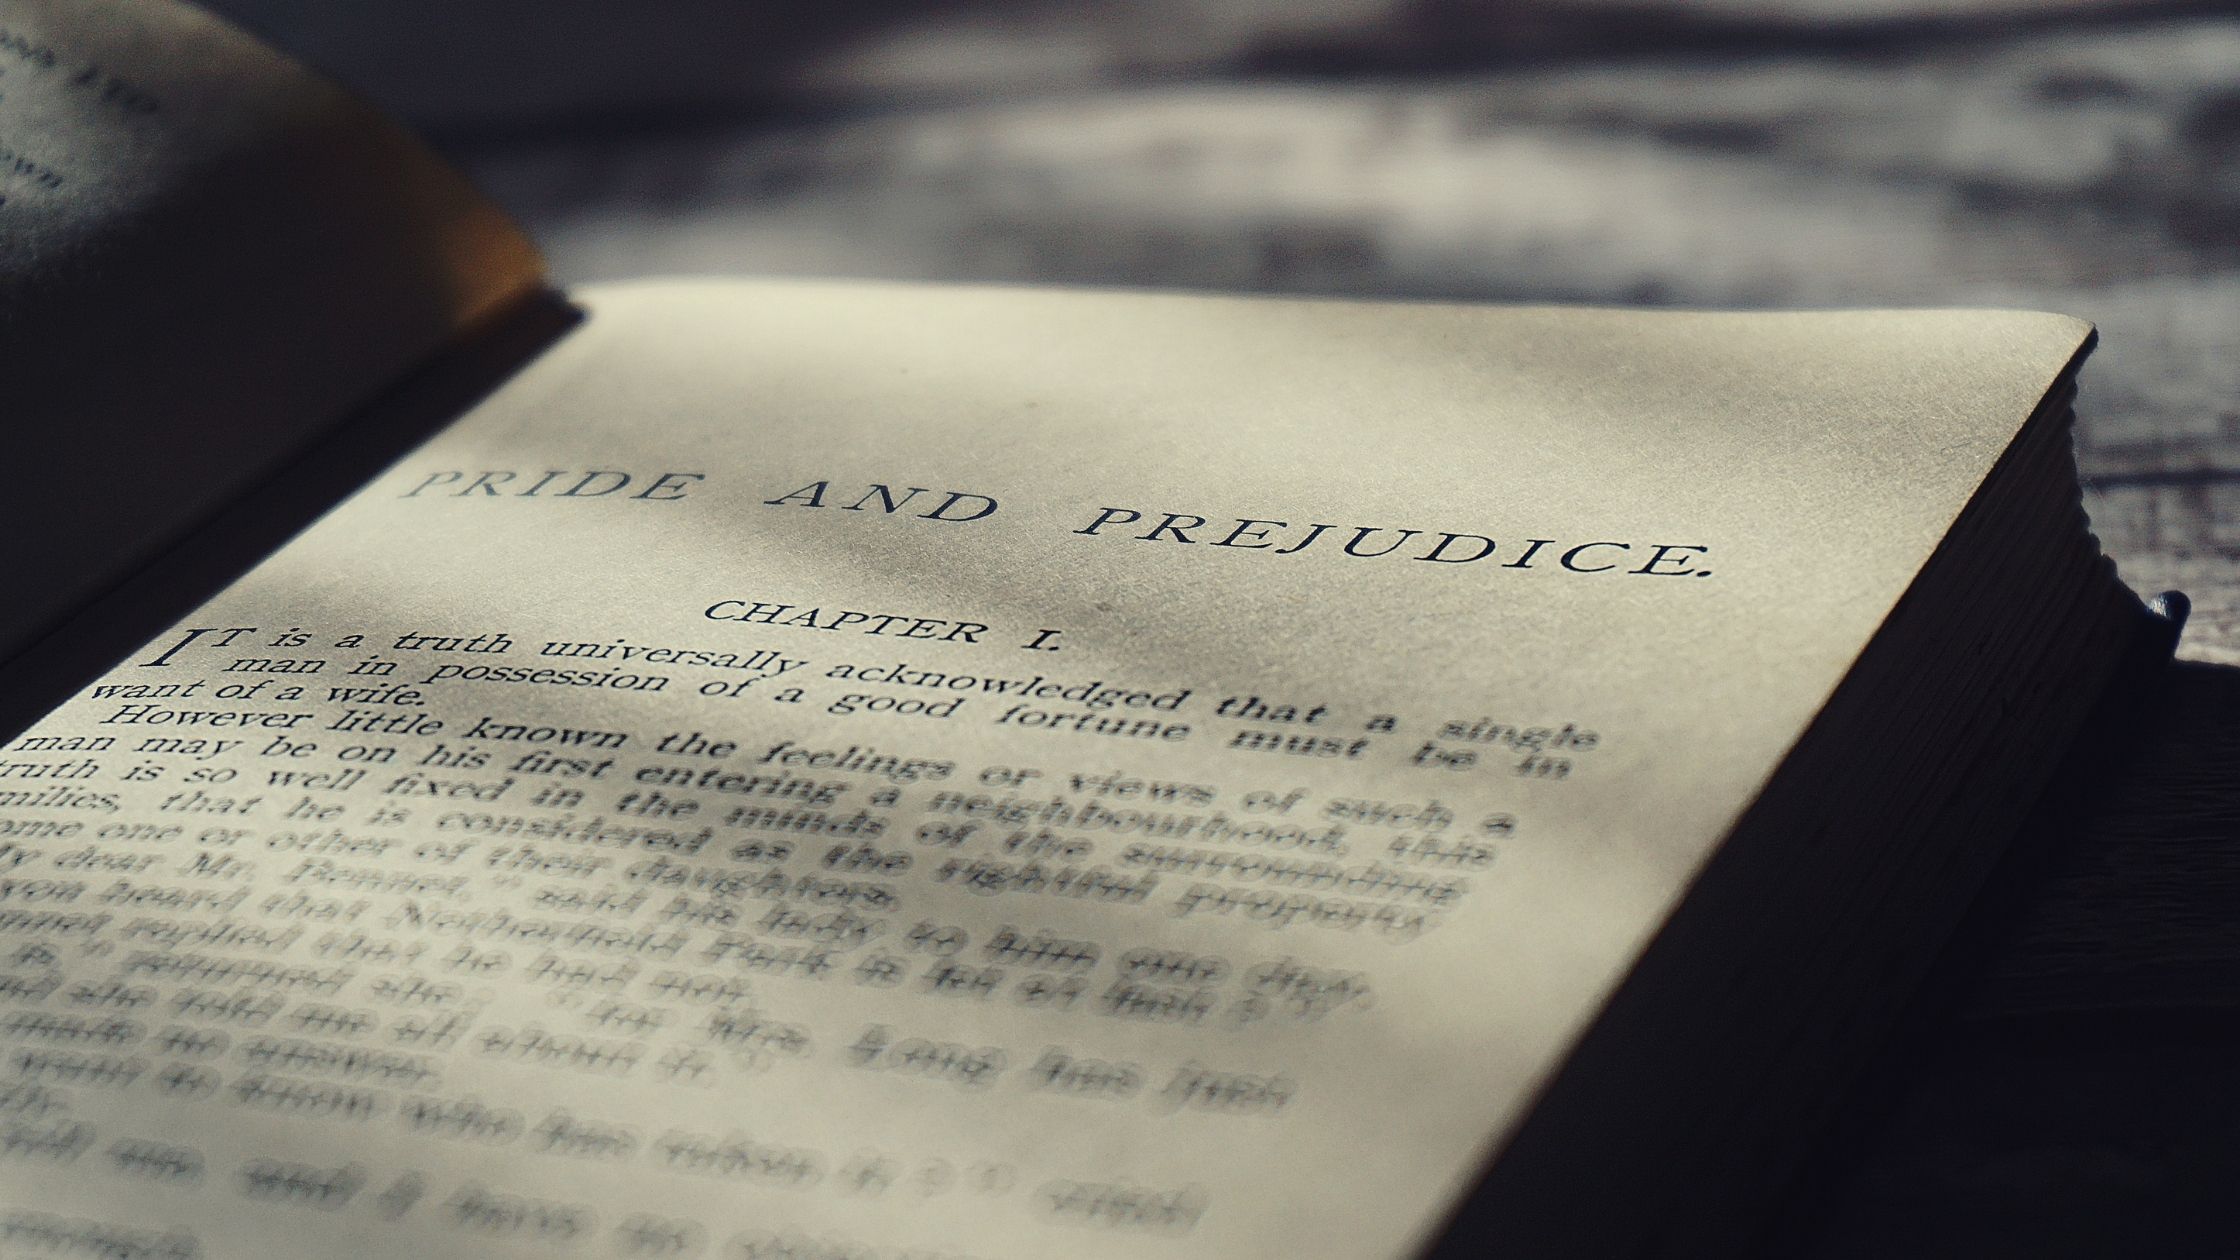 How well do you know Pride and Prejudice? Take this quiz and find out!